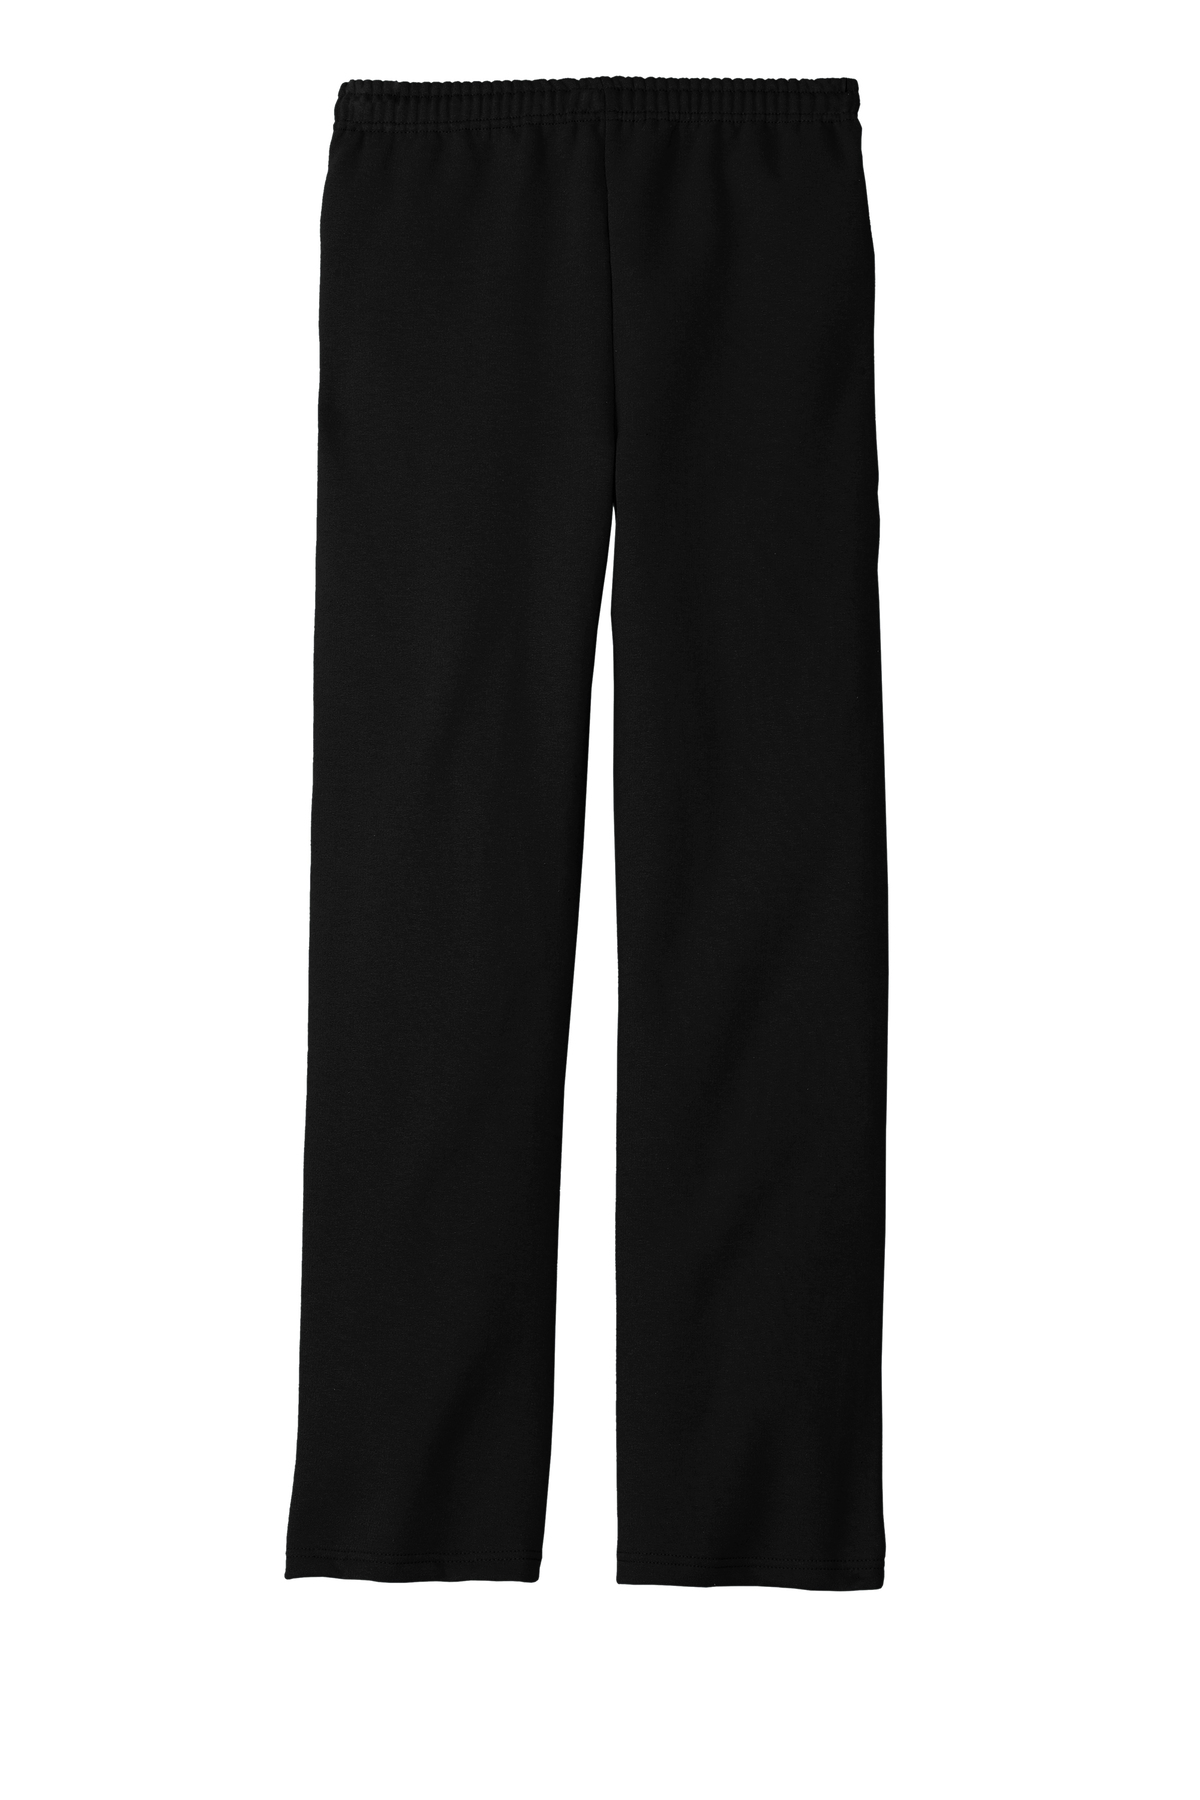 Jerzees NuBlend Open Bottom Pant with Pockets | Product | SanMar